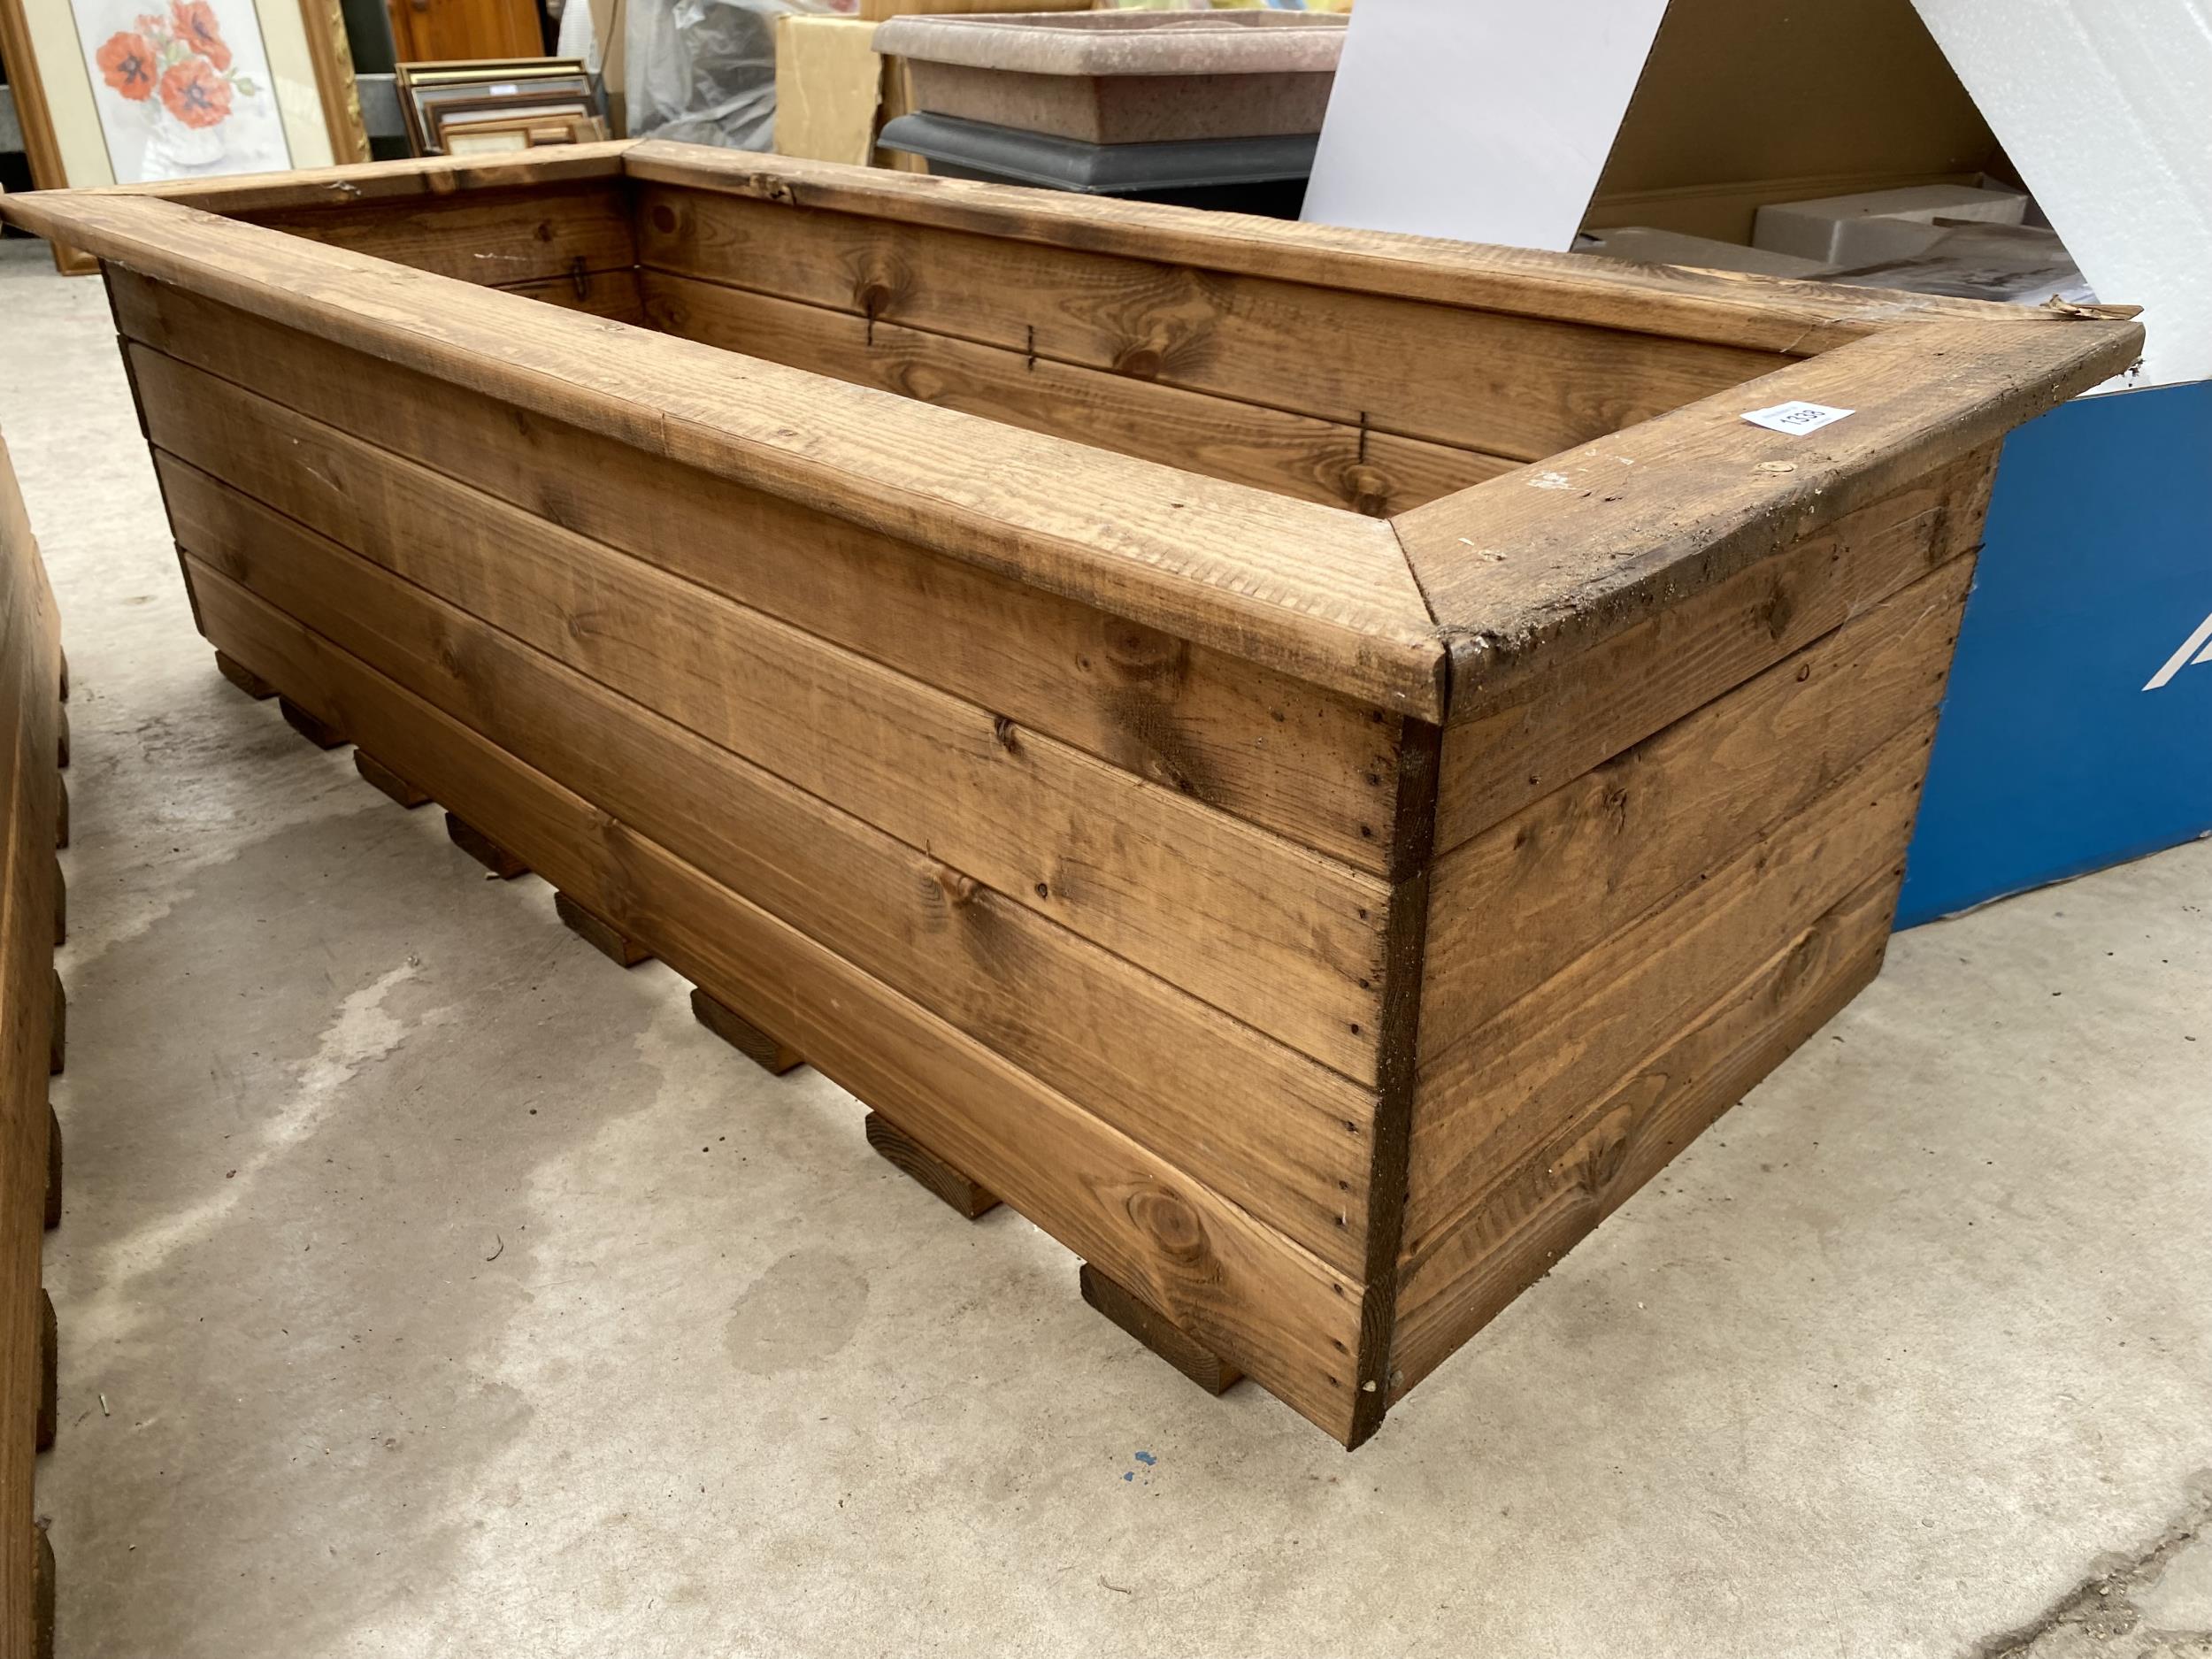 A LARGE AS NEW CHARLES TAYLOR STYLE WOODEN PLANTER TROUGH - Image 2 of 4